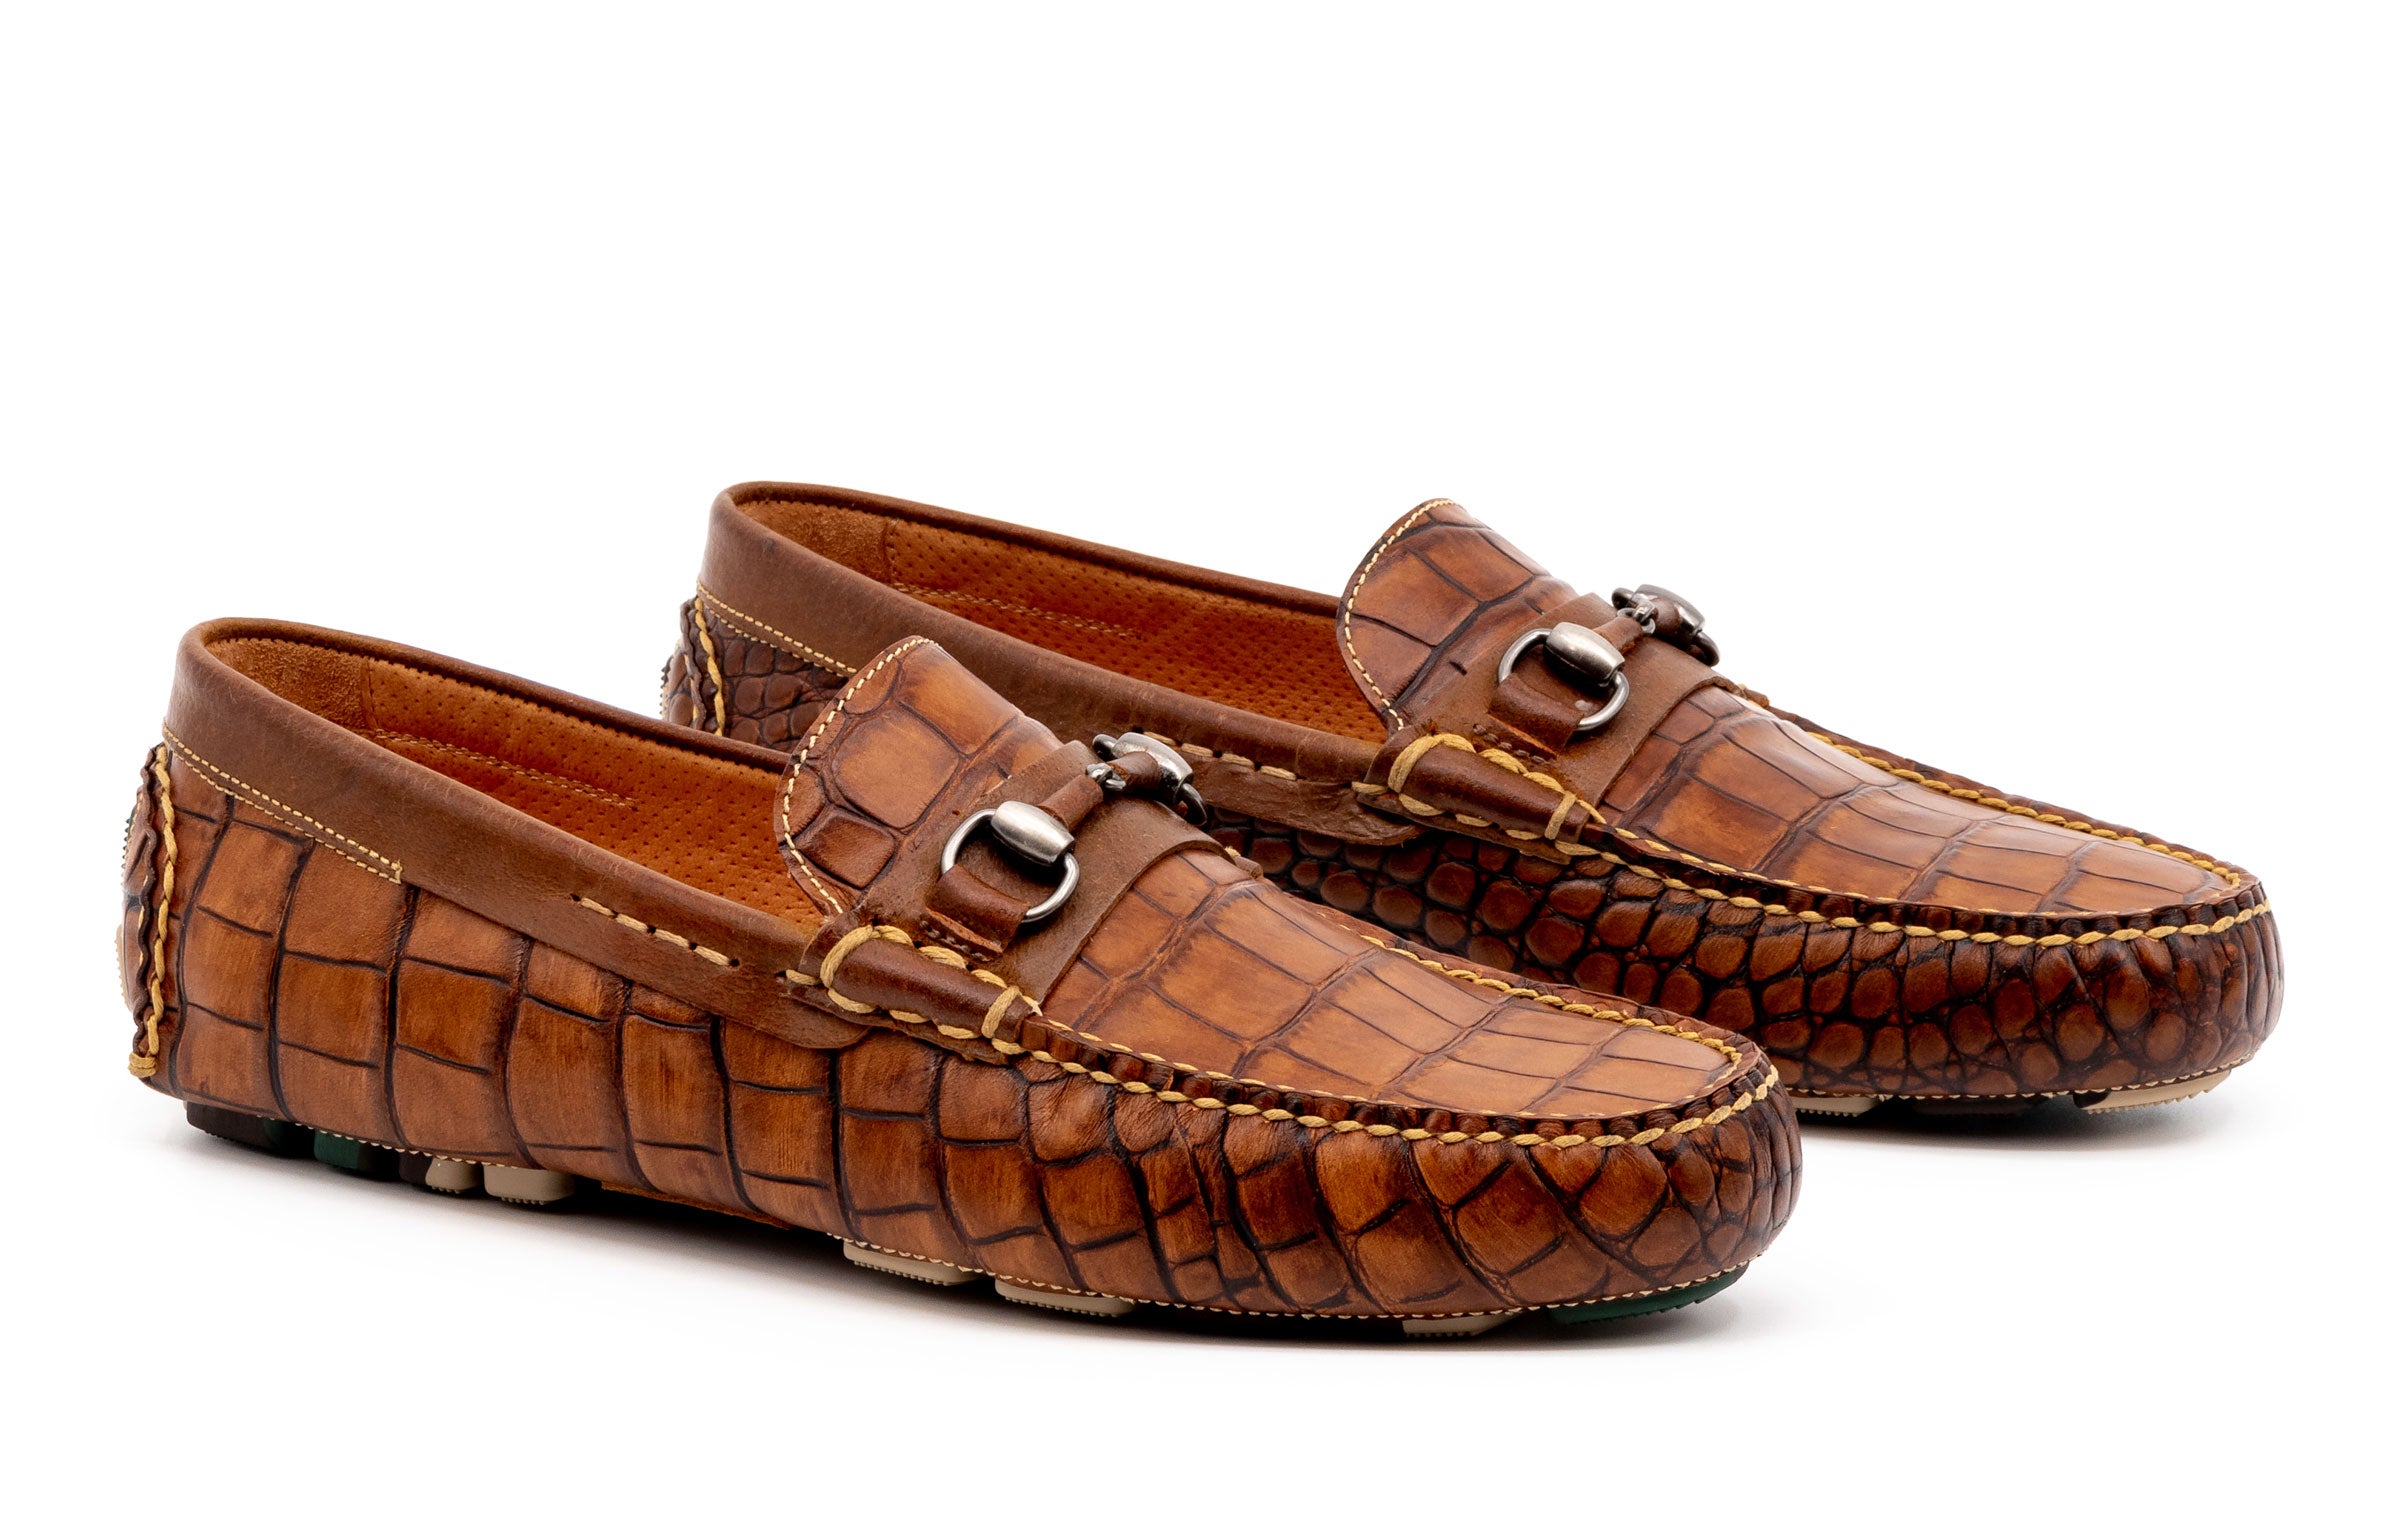 Monte Carlo Moccasins - Luxury Loafers and Moccasins - Shoes, Men 1A8F7T